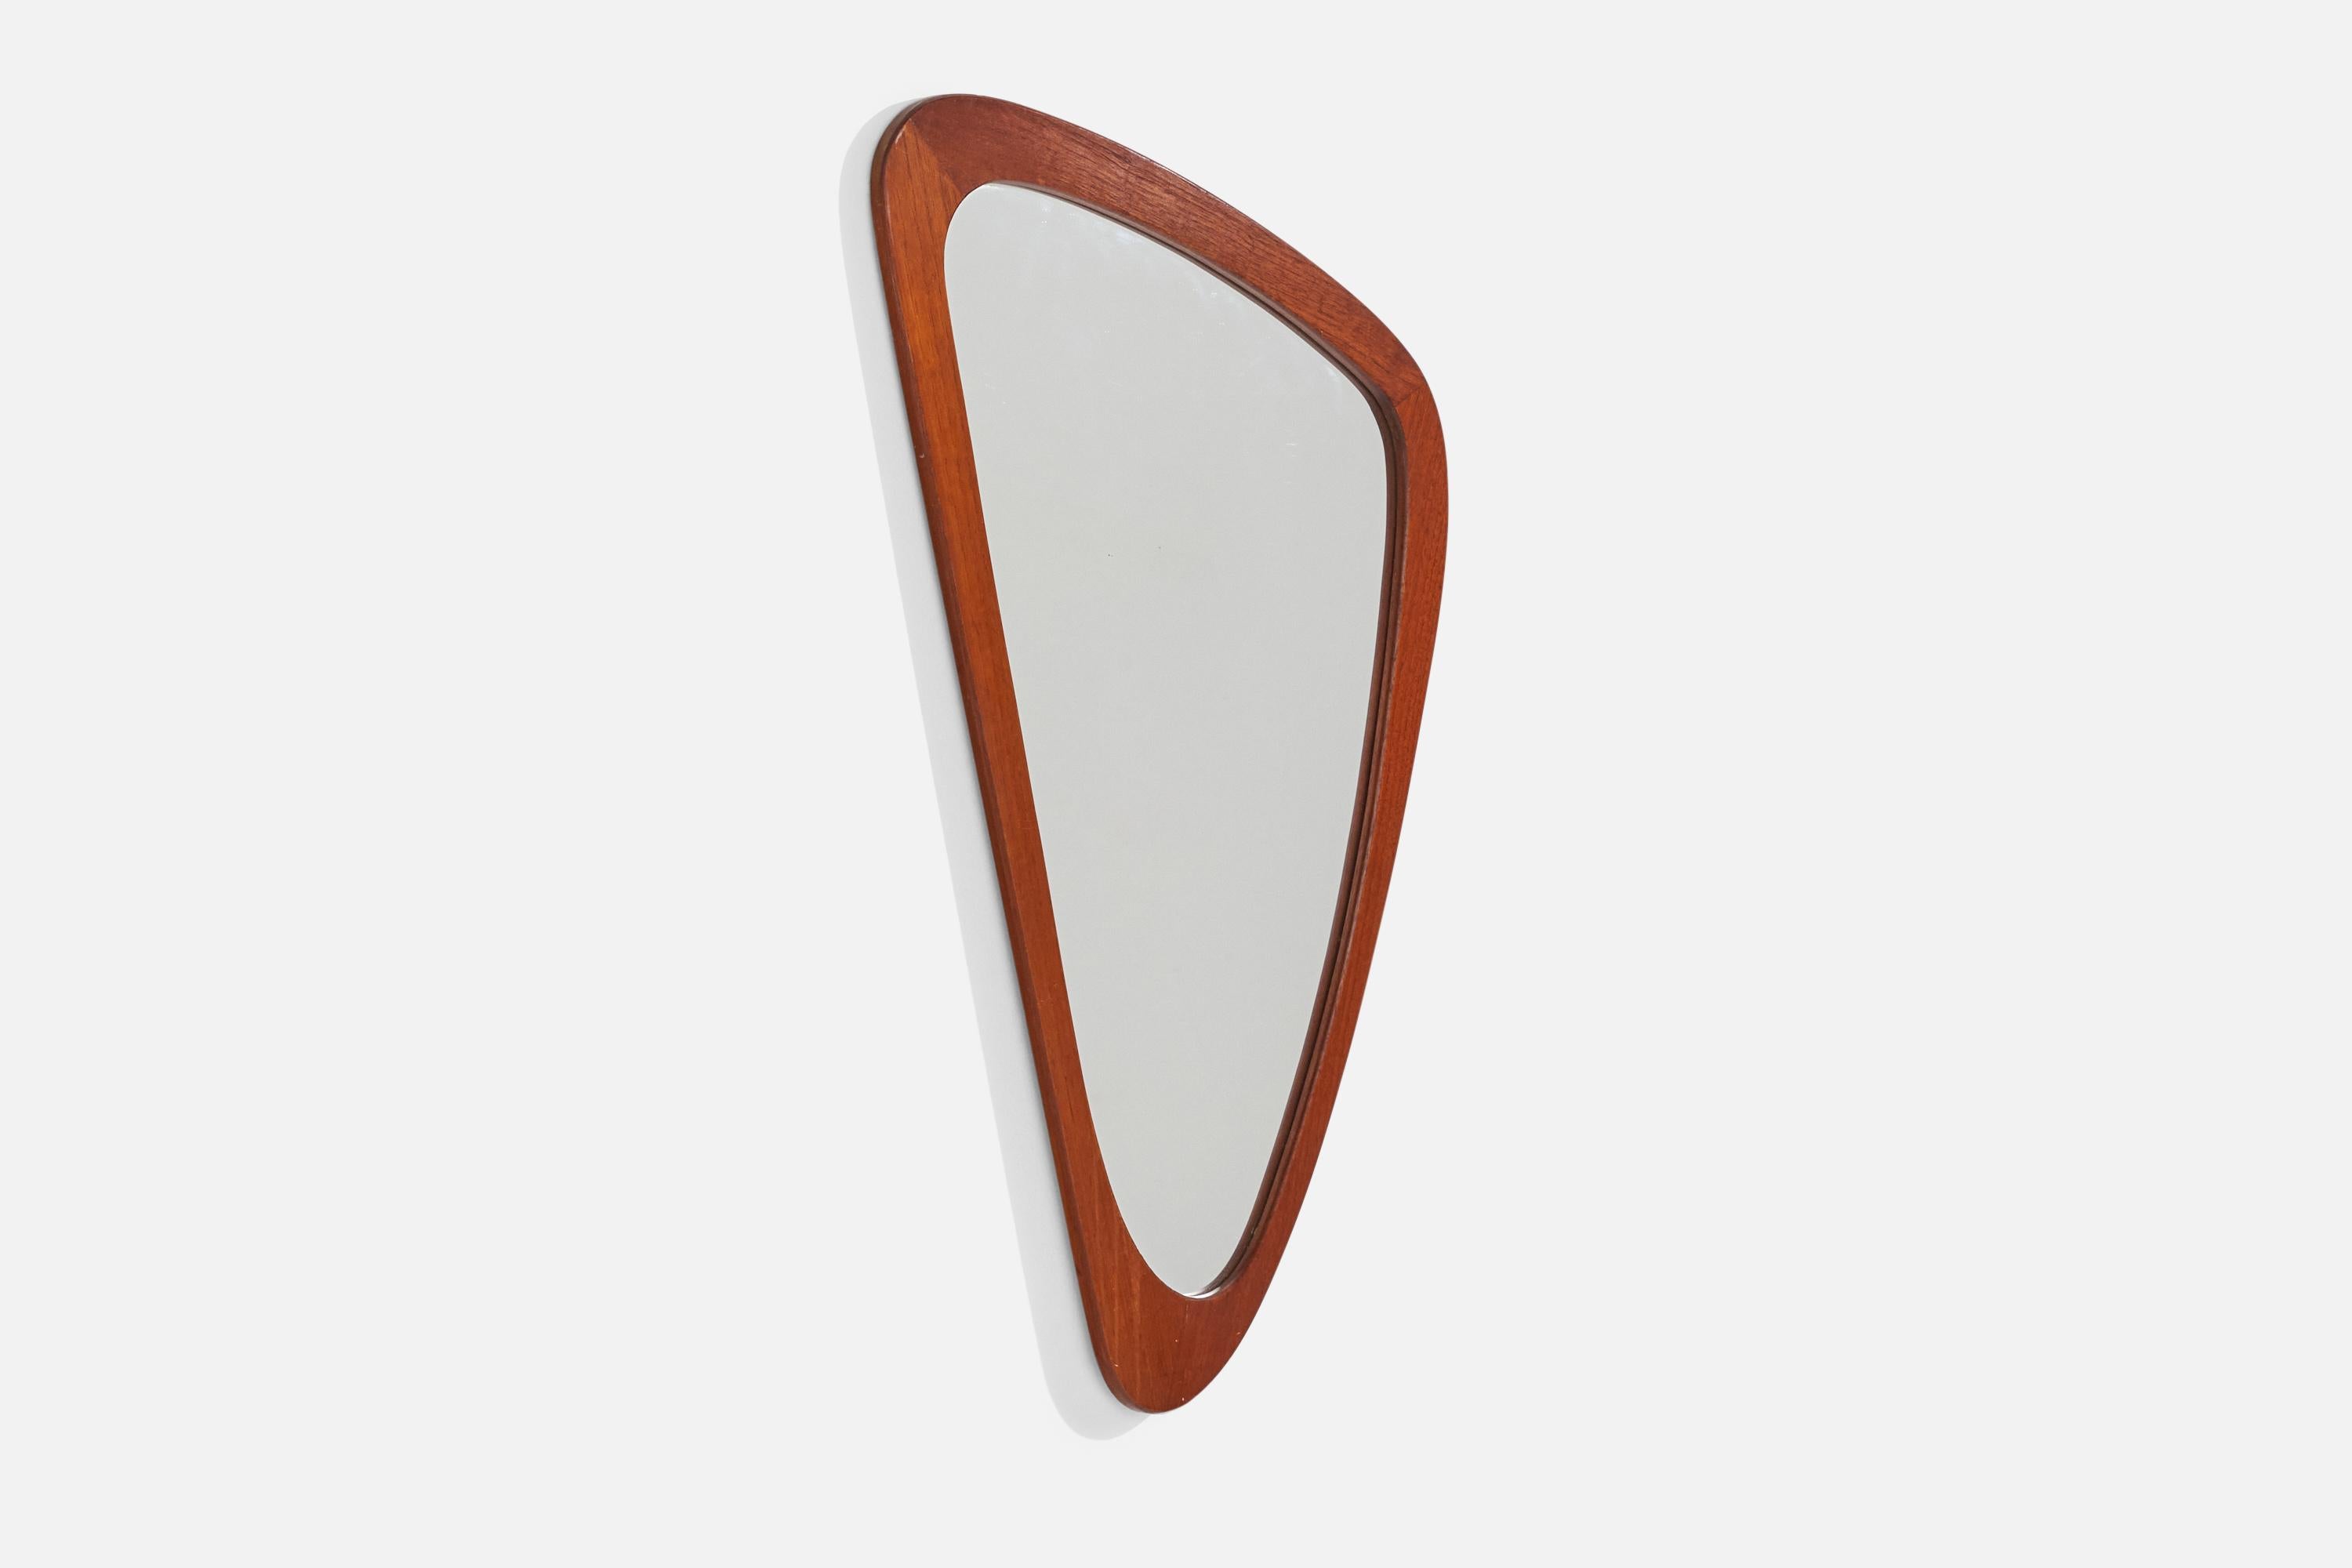 An organic teak wall mirror designed and produced in Sweden, c. 1960s.